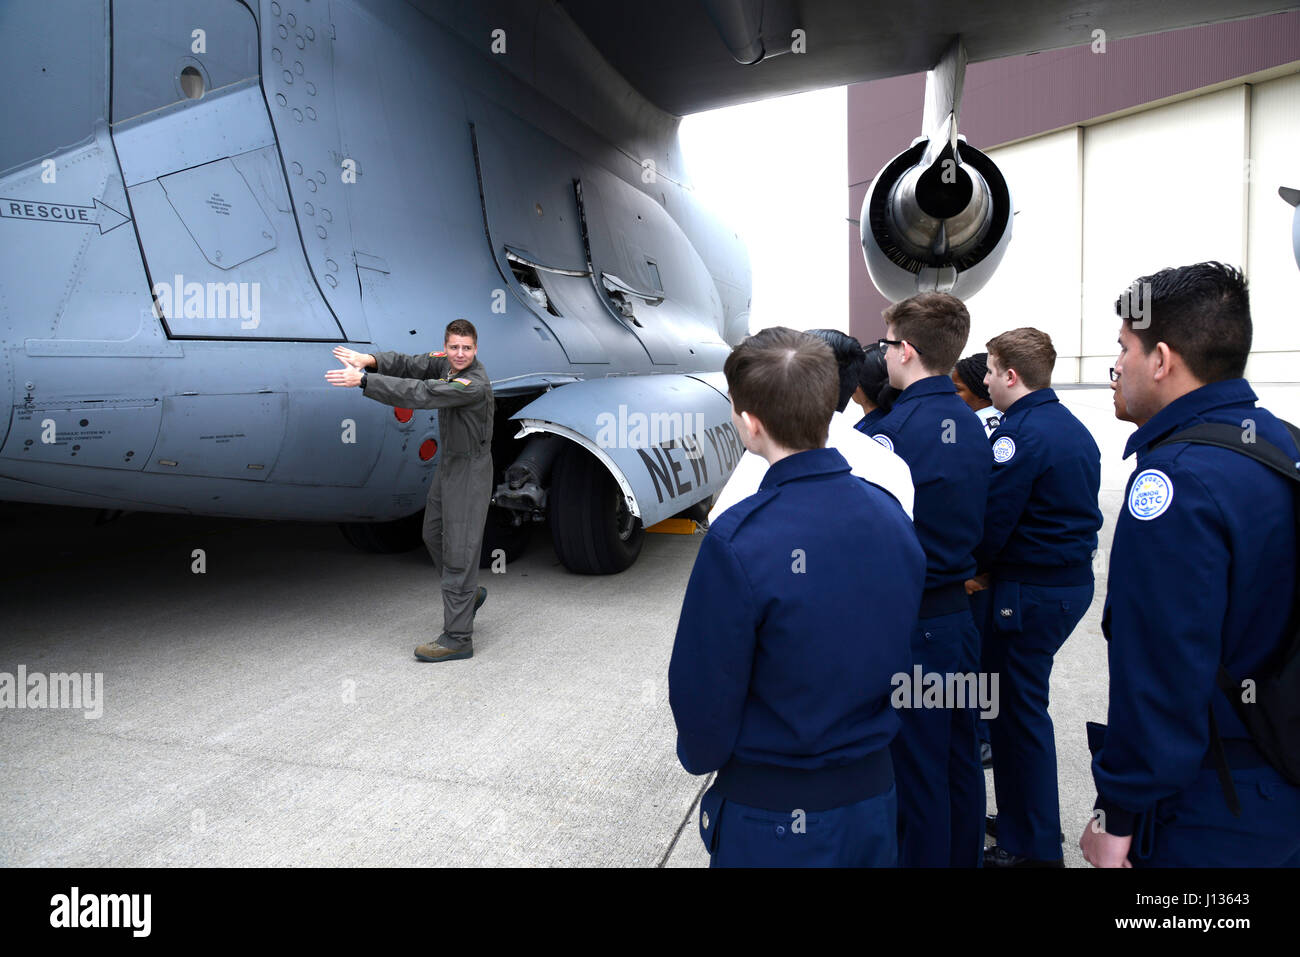 Senior Airman Levi Grant, a loadmaster assigned to the 105th Airlift Wing, gives a tour of the C-17 Globemaster III to cadets from the Newburgh Free Academy Junior Reserve Officer Training program at Stewart Air National Guard Base, New York April 3, 2017. The cadets toured the C-17 and got a demonstration from the aircrew flight equipment section. (U.S. Air Force photo by Staff Sgt. Julio A. Olivencia Jr.) Stock Photo